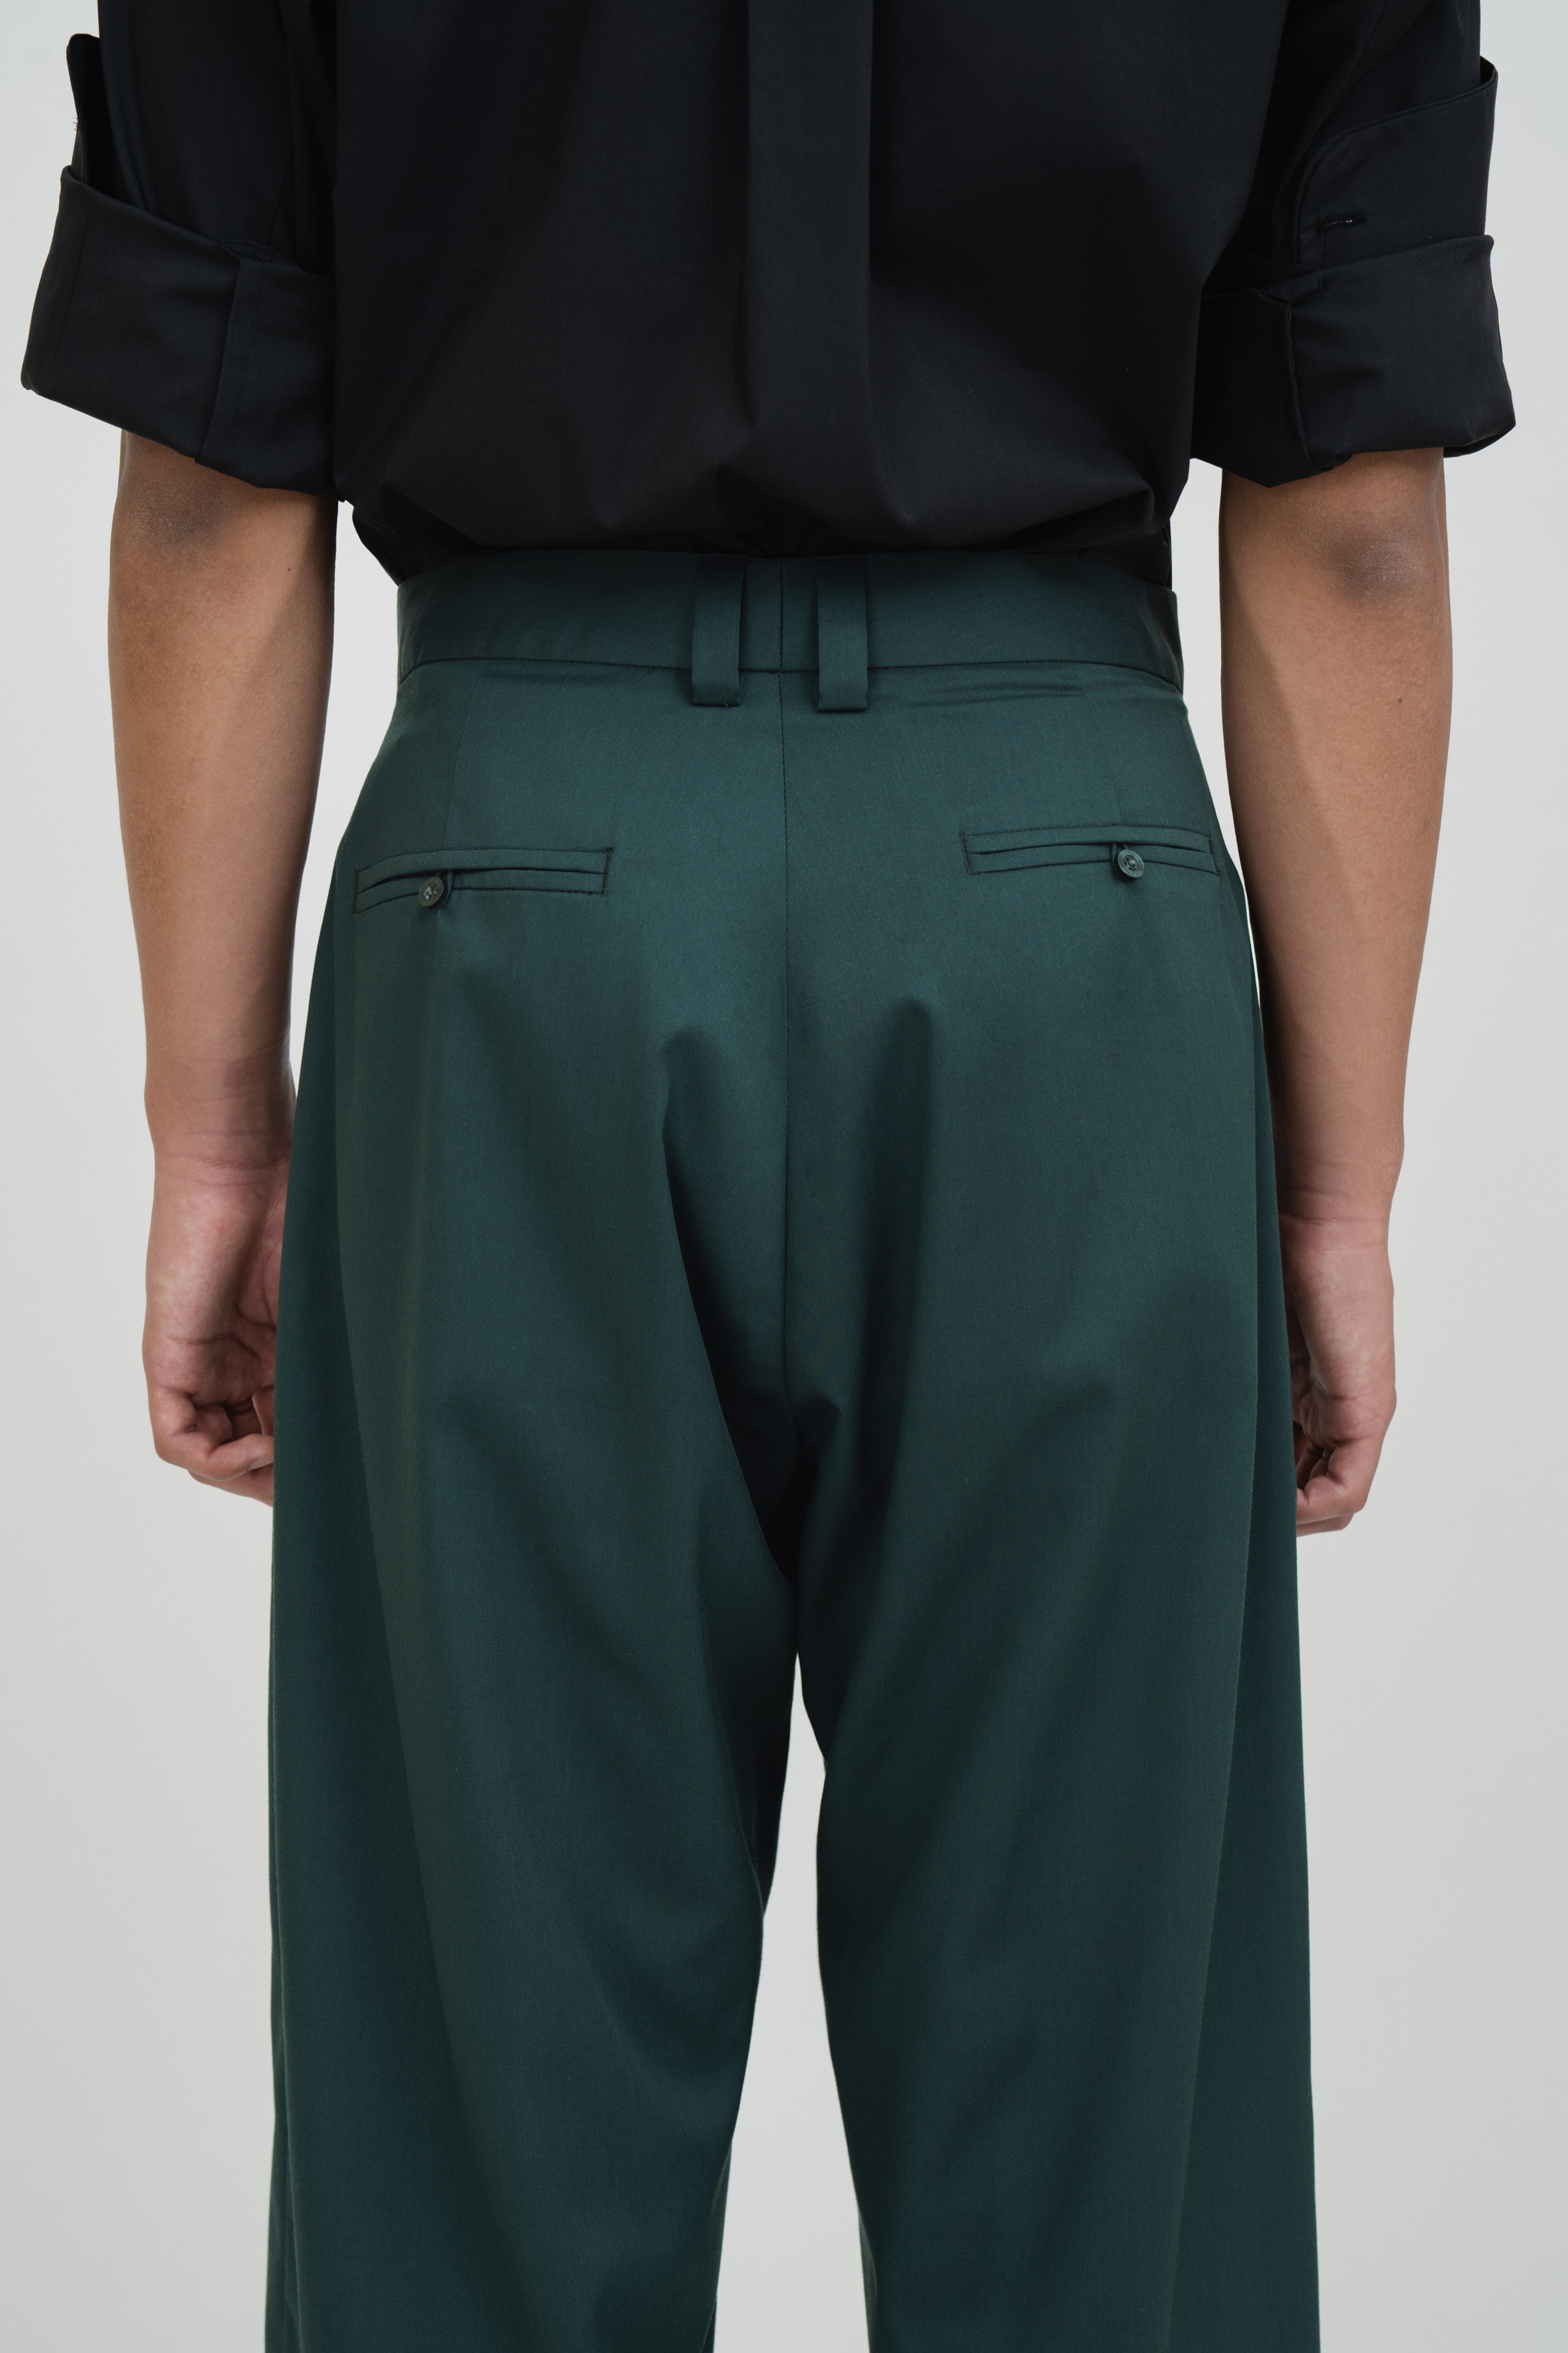 RINTO PANTS - Forest Green